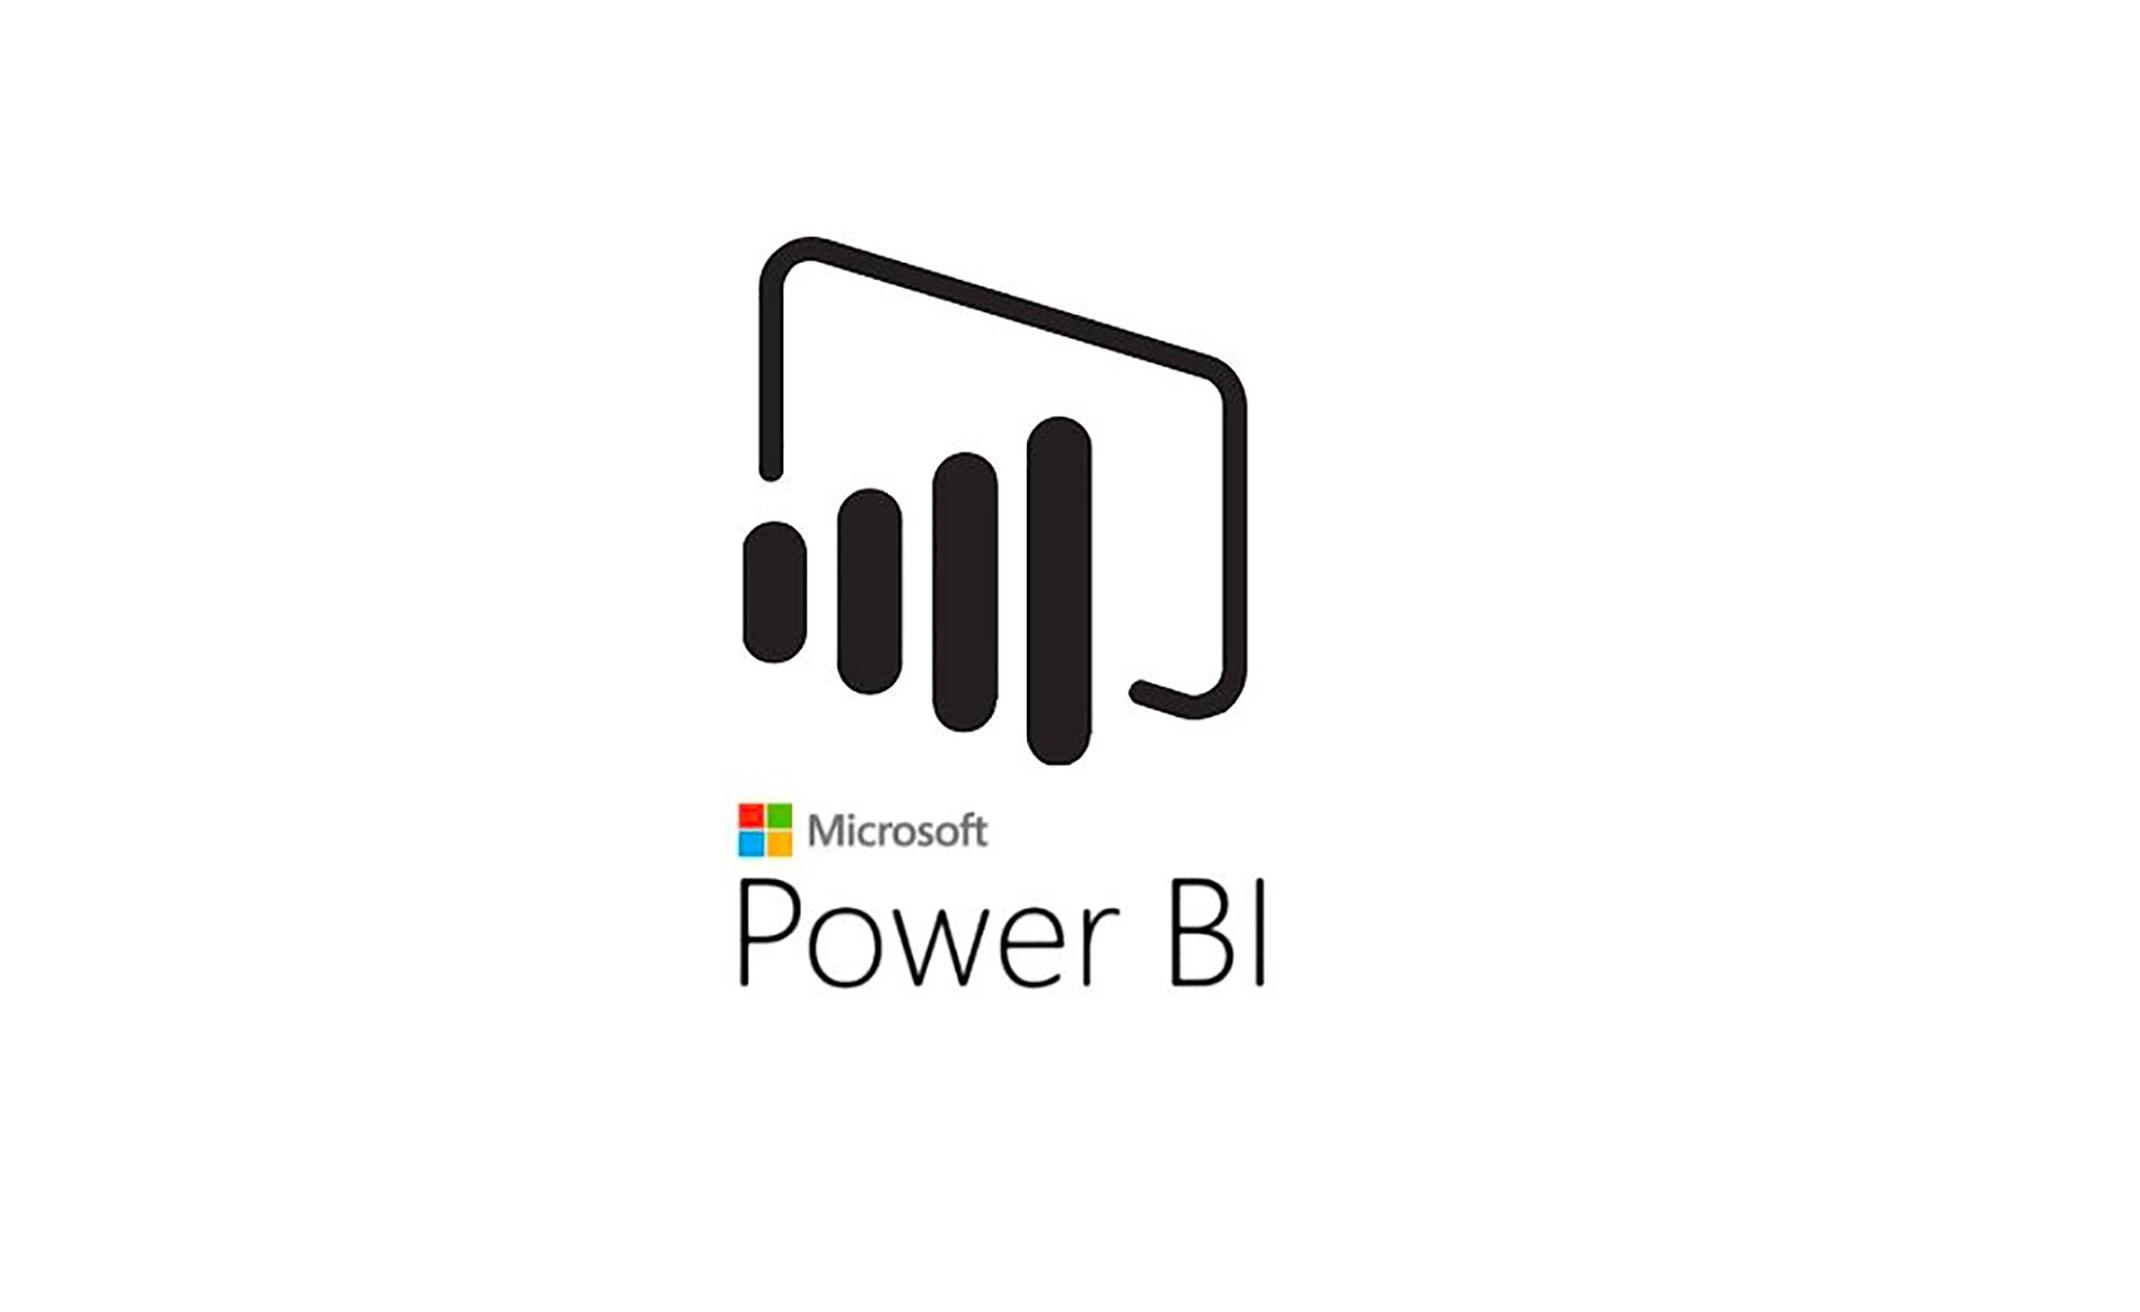 4 Weeks Microsoft Power BI Training in Mobile | Introduction to Power BI training for beginners | Getting started with Power BI | What is Power BI | June 1, 2020 - June 24, 2020